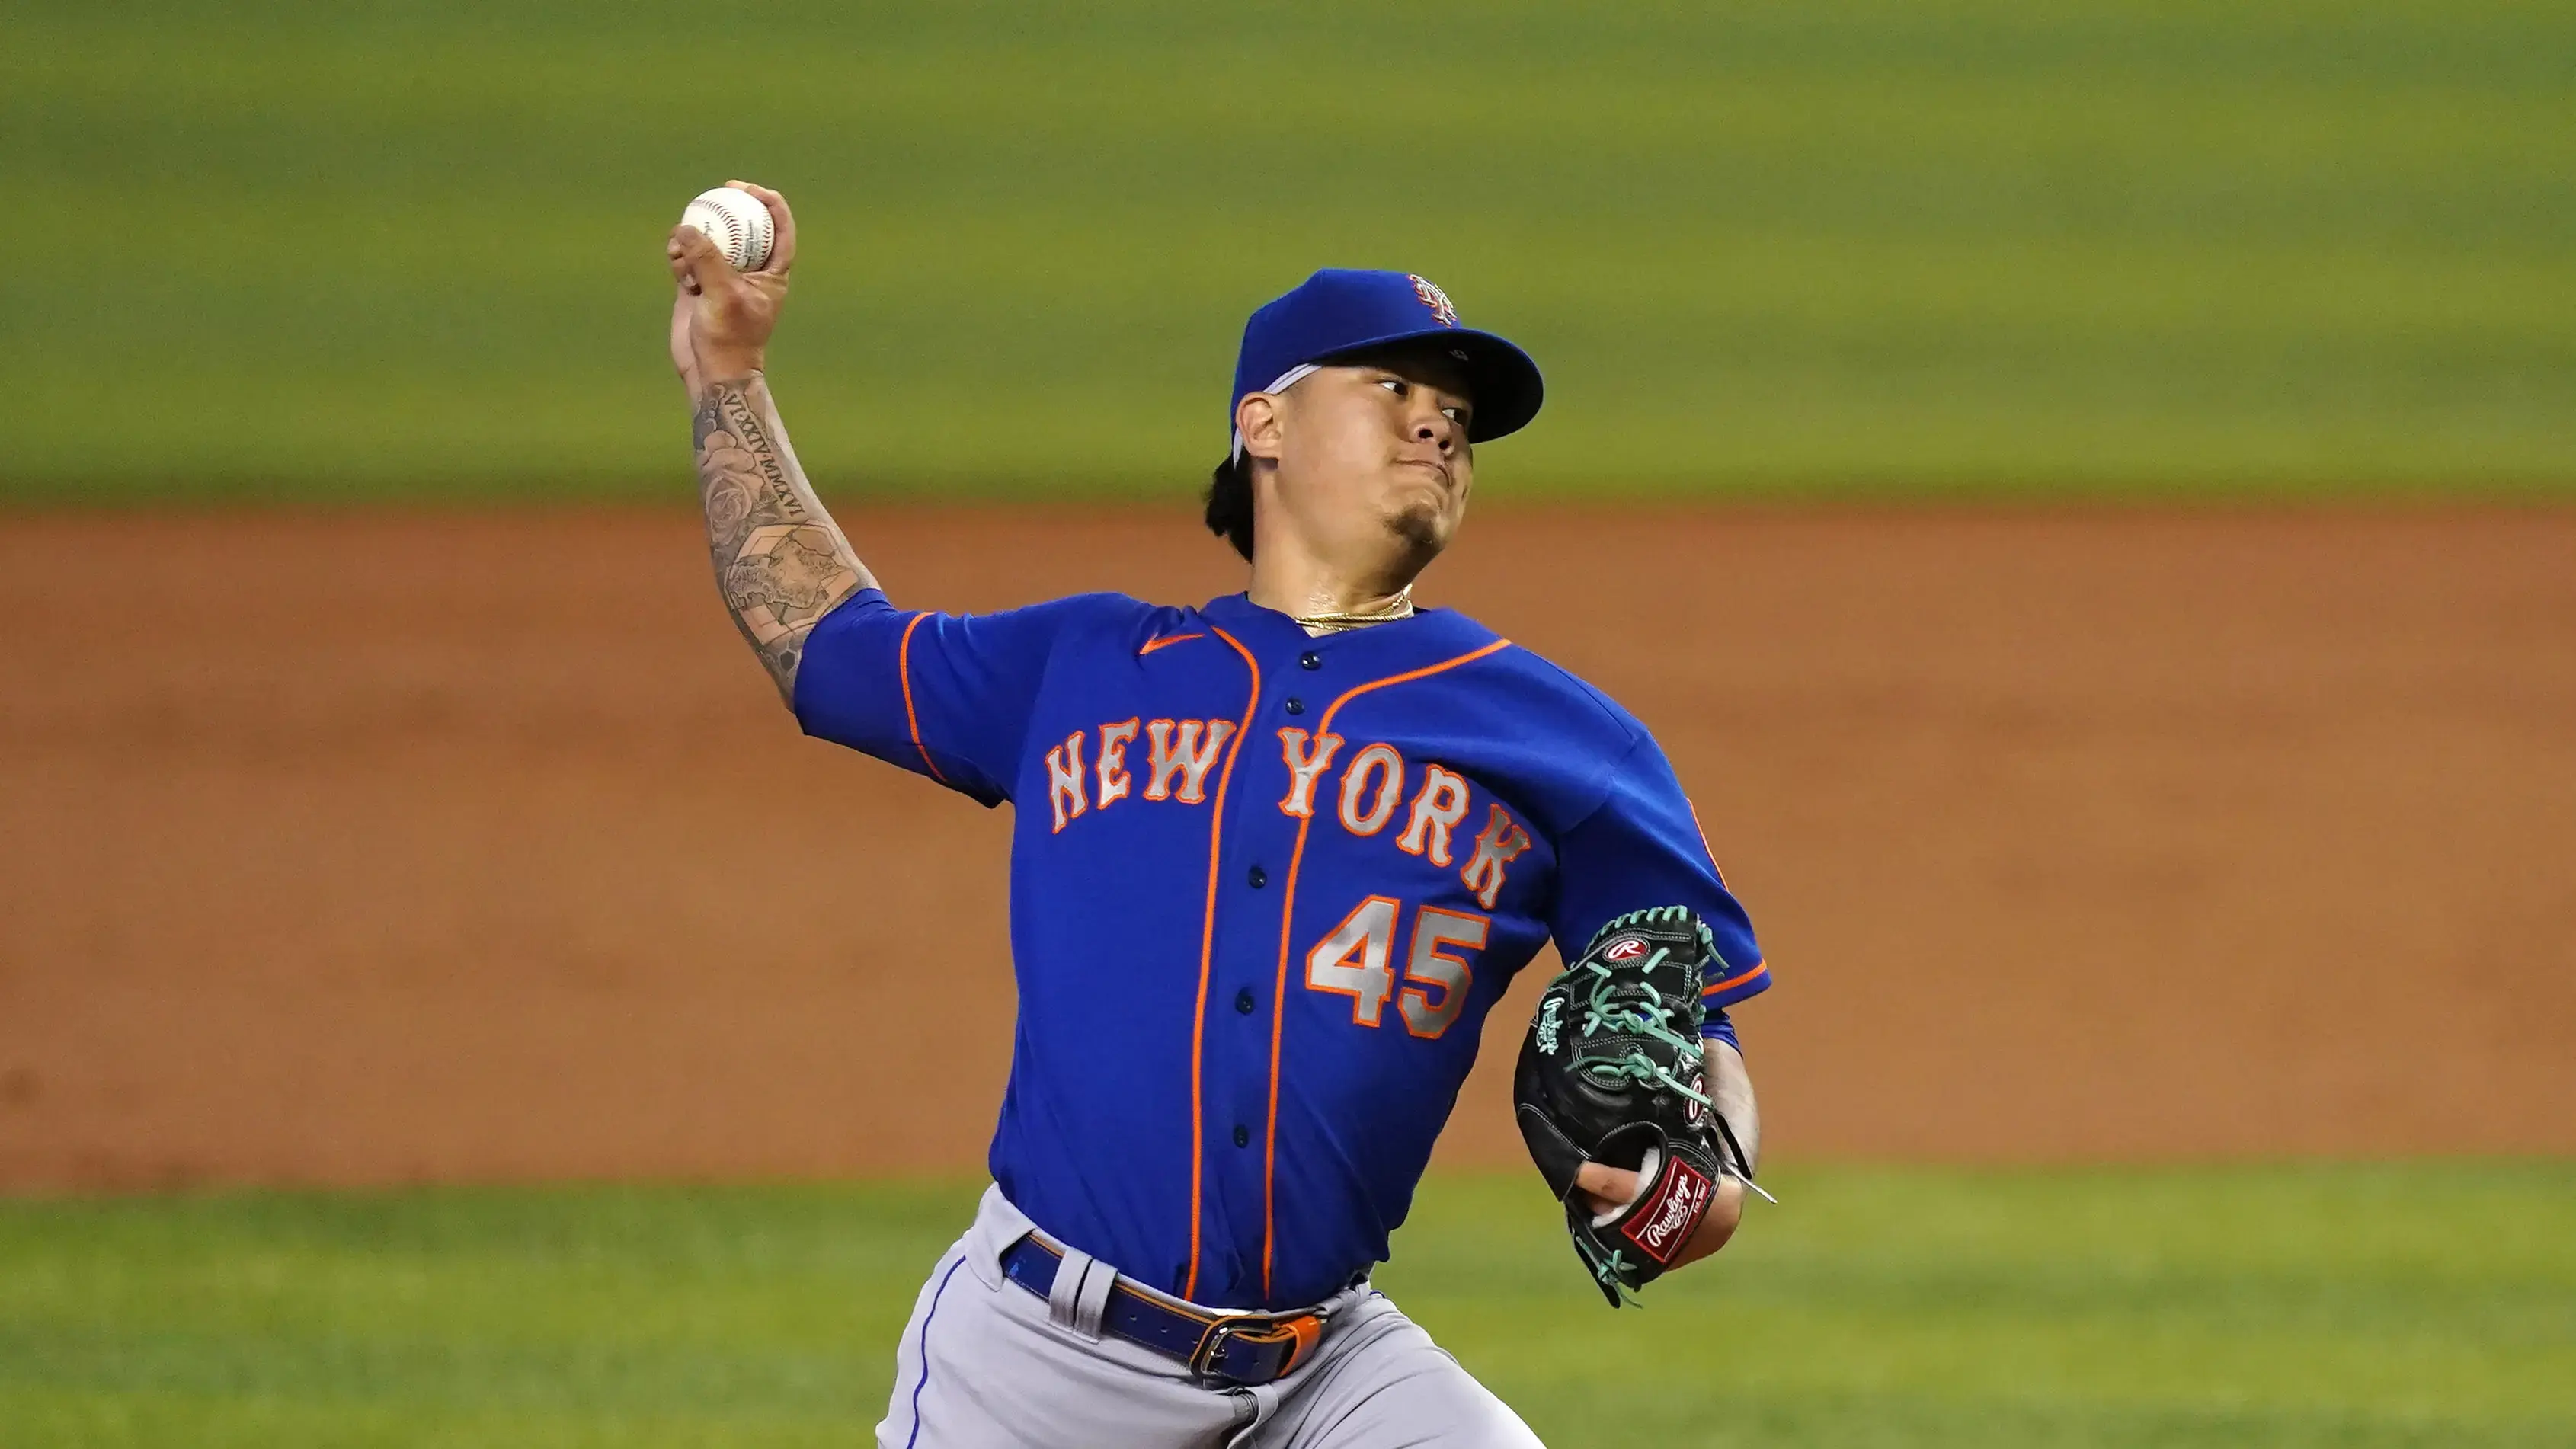 New York Mets starting pitcher Jordan Yamamoto (45) delivers a pitch in the 1st inning against the Miami Marlins at loanDepot park. / Jasen Vinlove-USA TODAY Sports